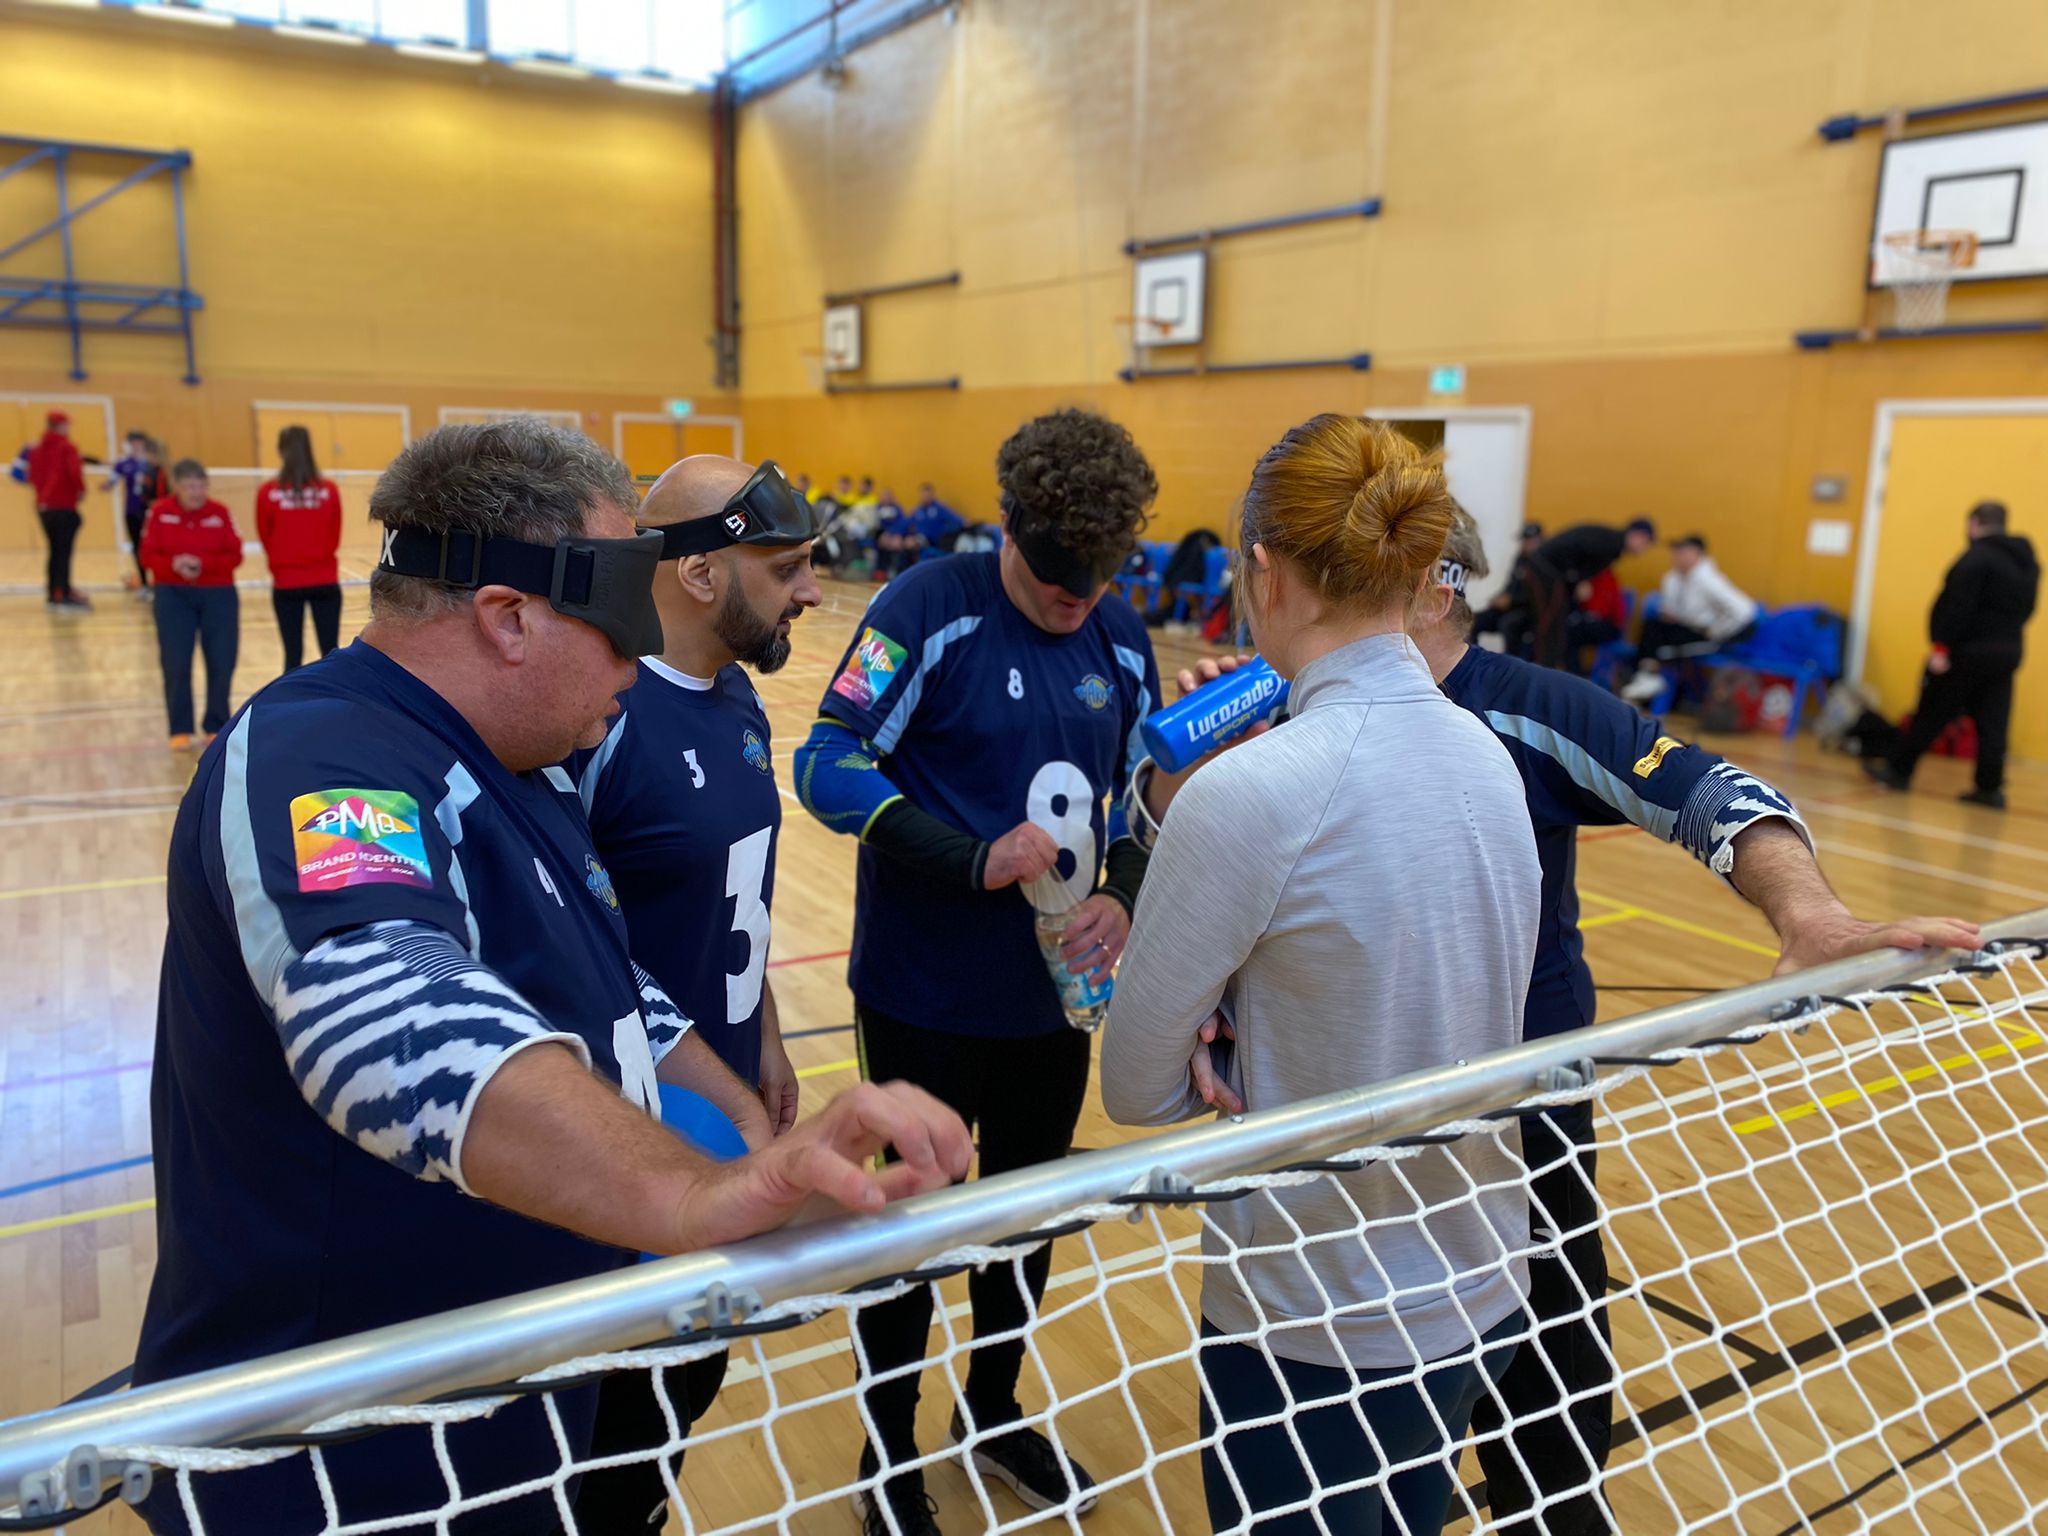 Connie, coach for Mersey Sharks is on court speaking to her team at a timeout, with players in their navy blue jerseys listening in and drinking fluids.